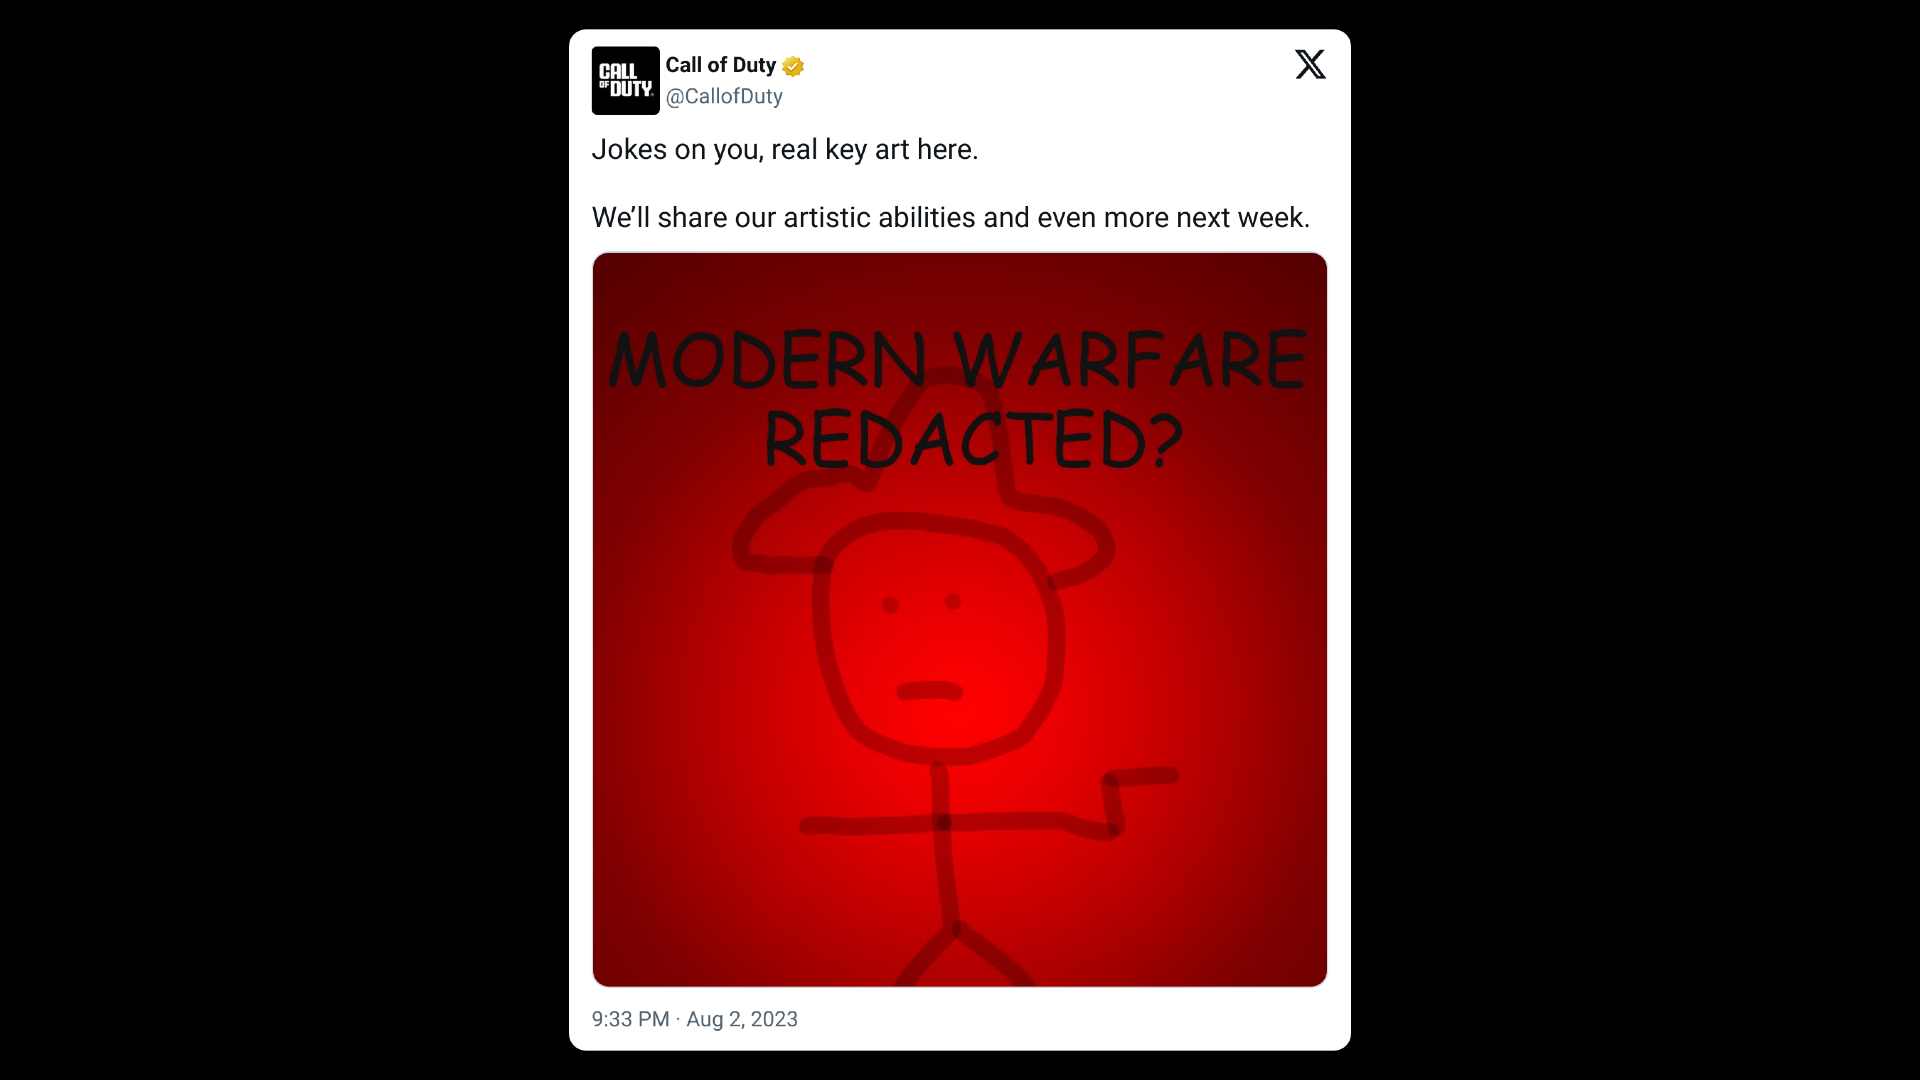 Tweet from Call of Duty's official account poking fun at the leaked Modern Warfare 3 art